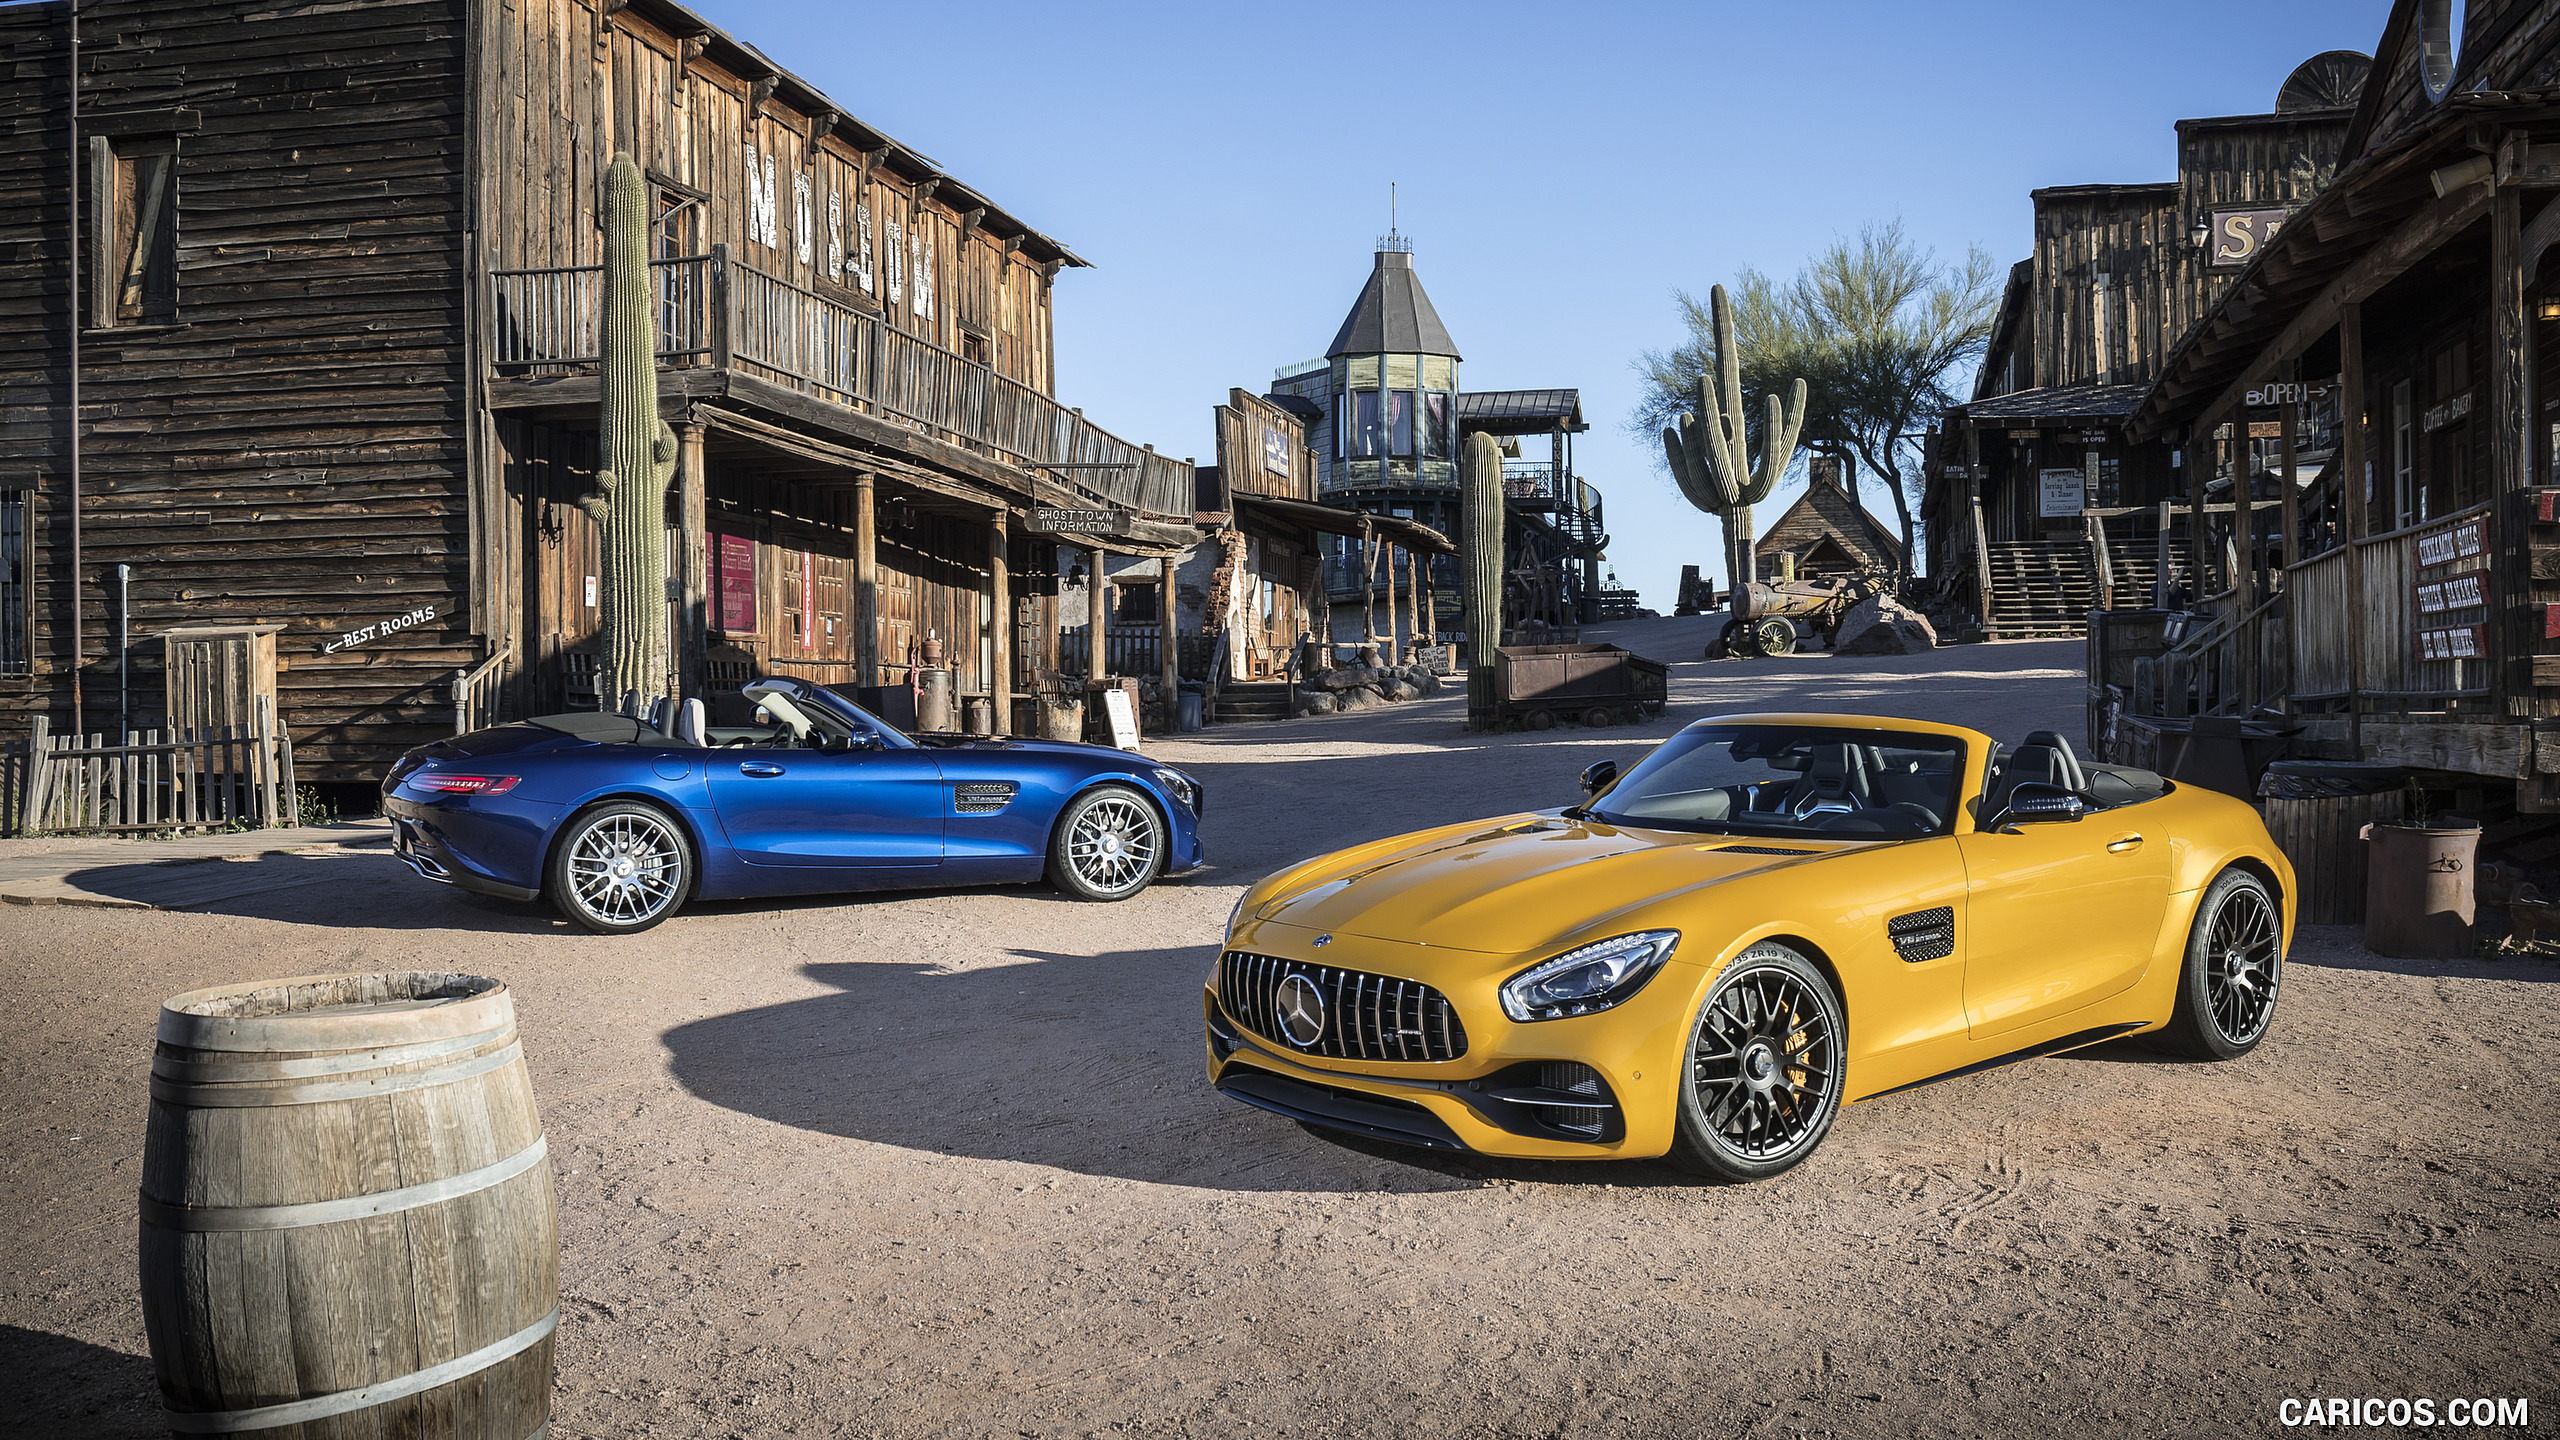 2018 Mercedes-AMG GT C Roadster - Front Three-Quarter, #167 of 350